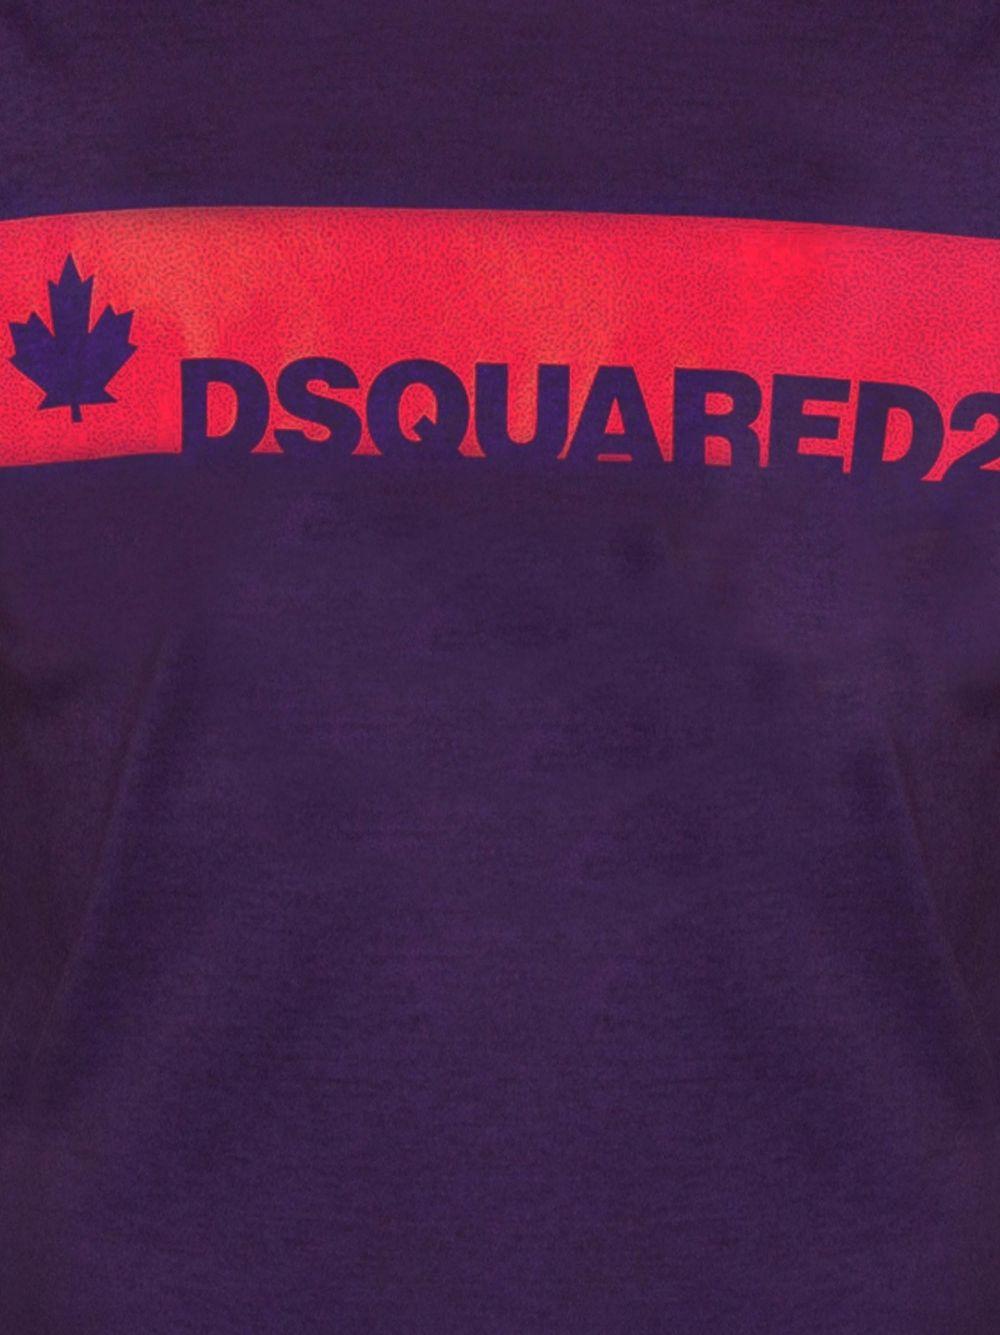 Red and Purple Logo - DSQUARED2 Purple Red Logo T Shirt